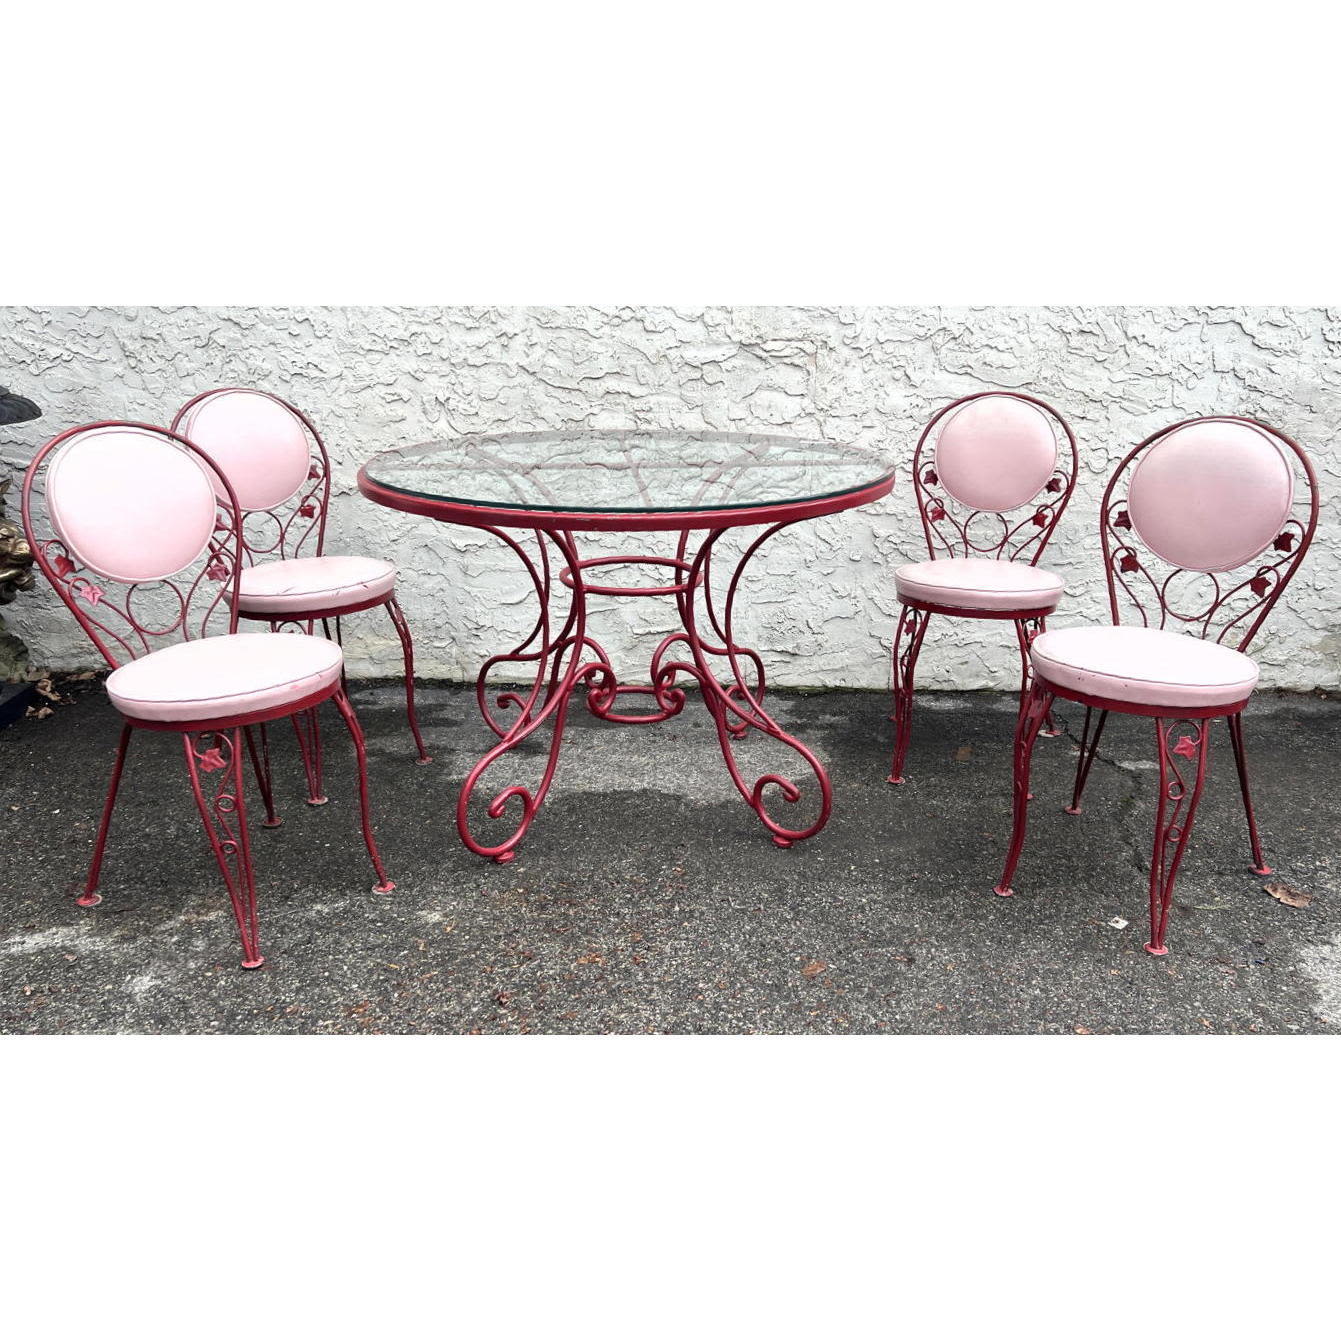 5pc Painted Red Iron Cafe Table 2b897a